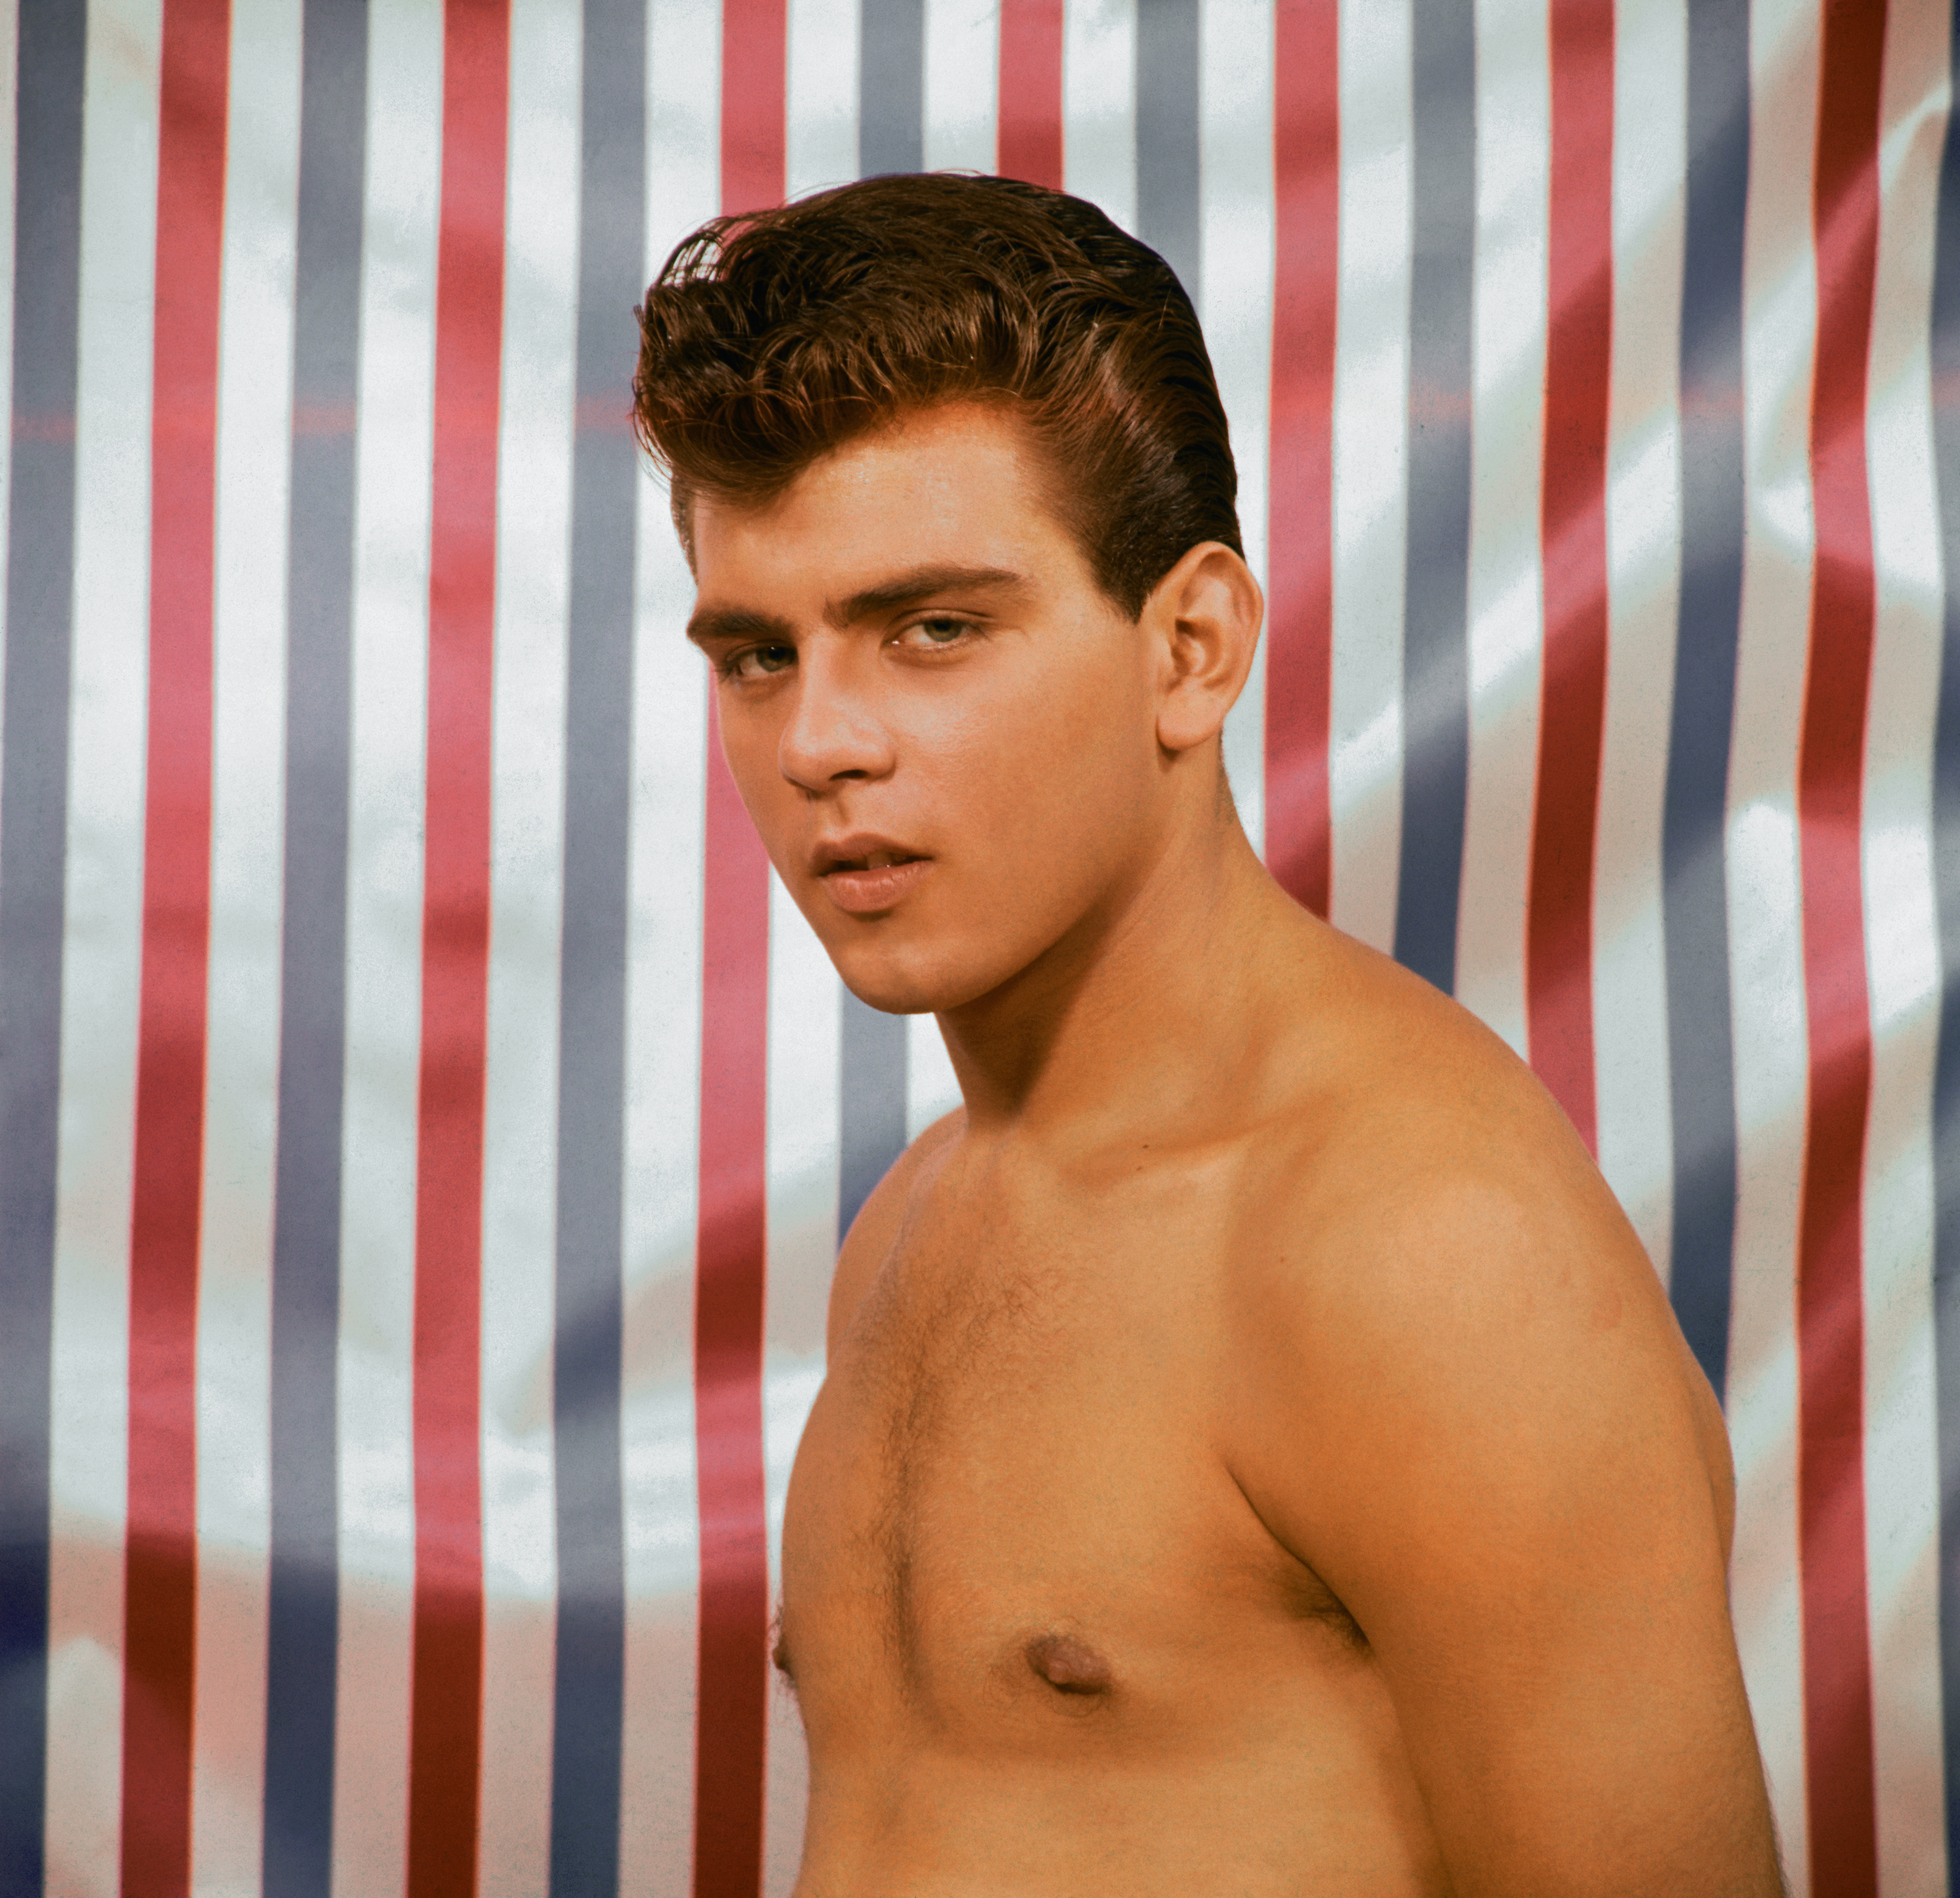 Portrait of American pop singer and actor Fabian circa the 1960s. | Source: Getty Images